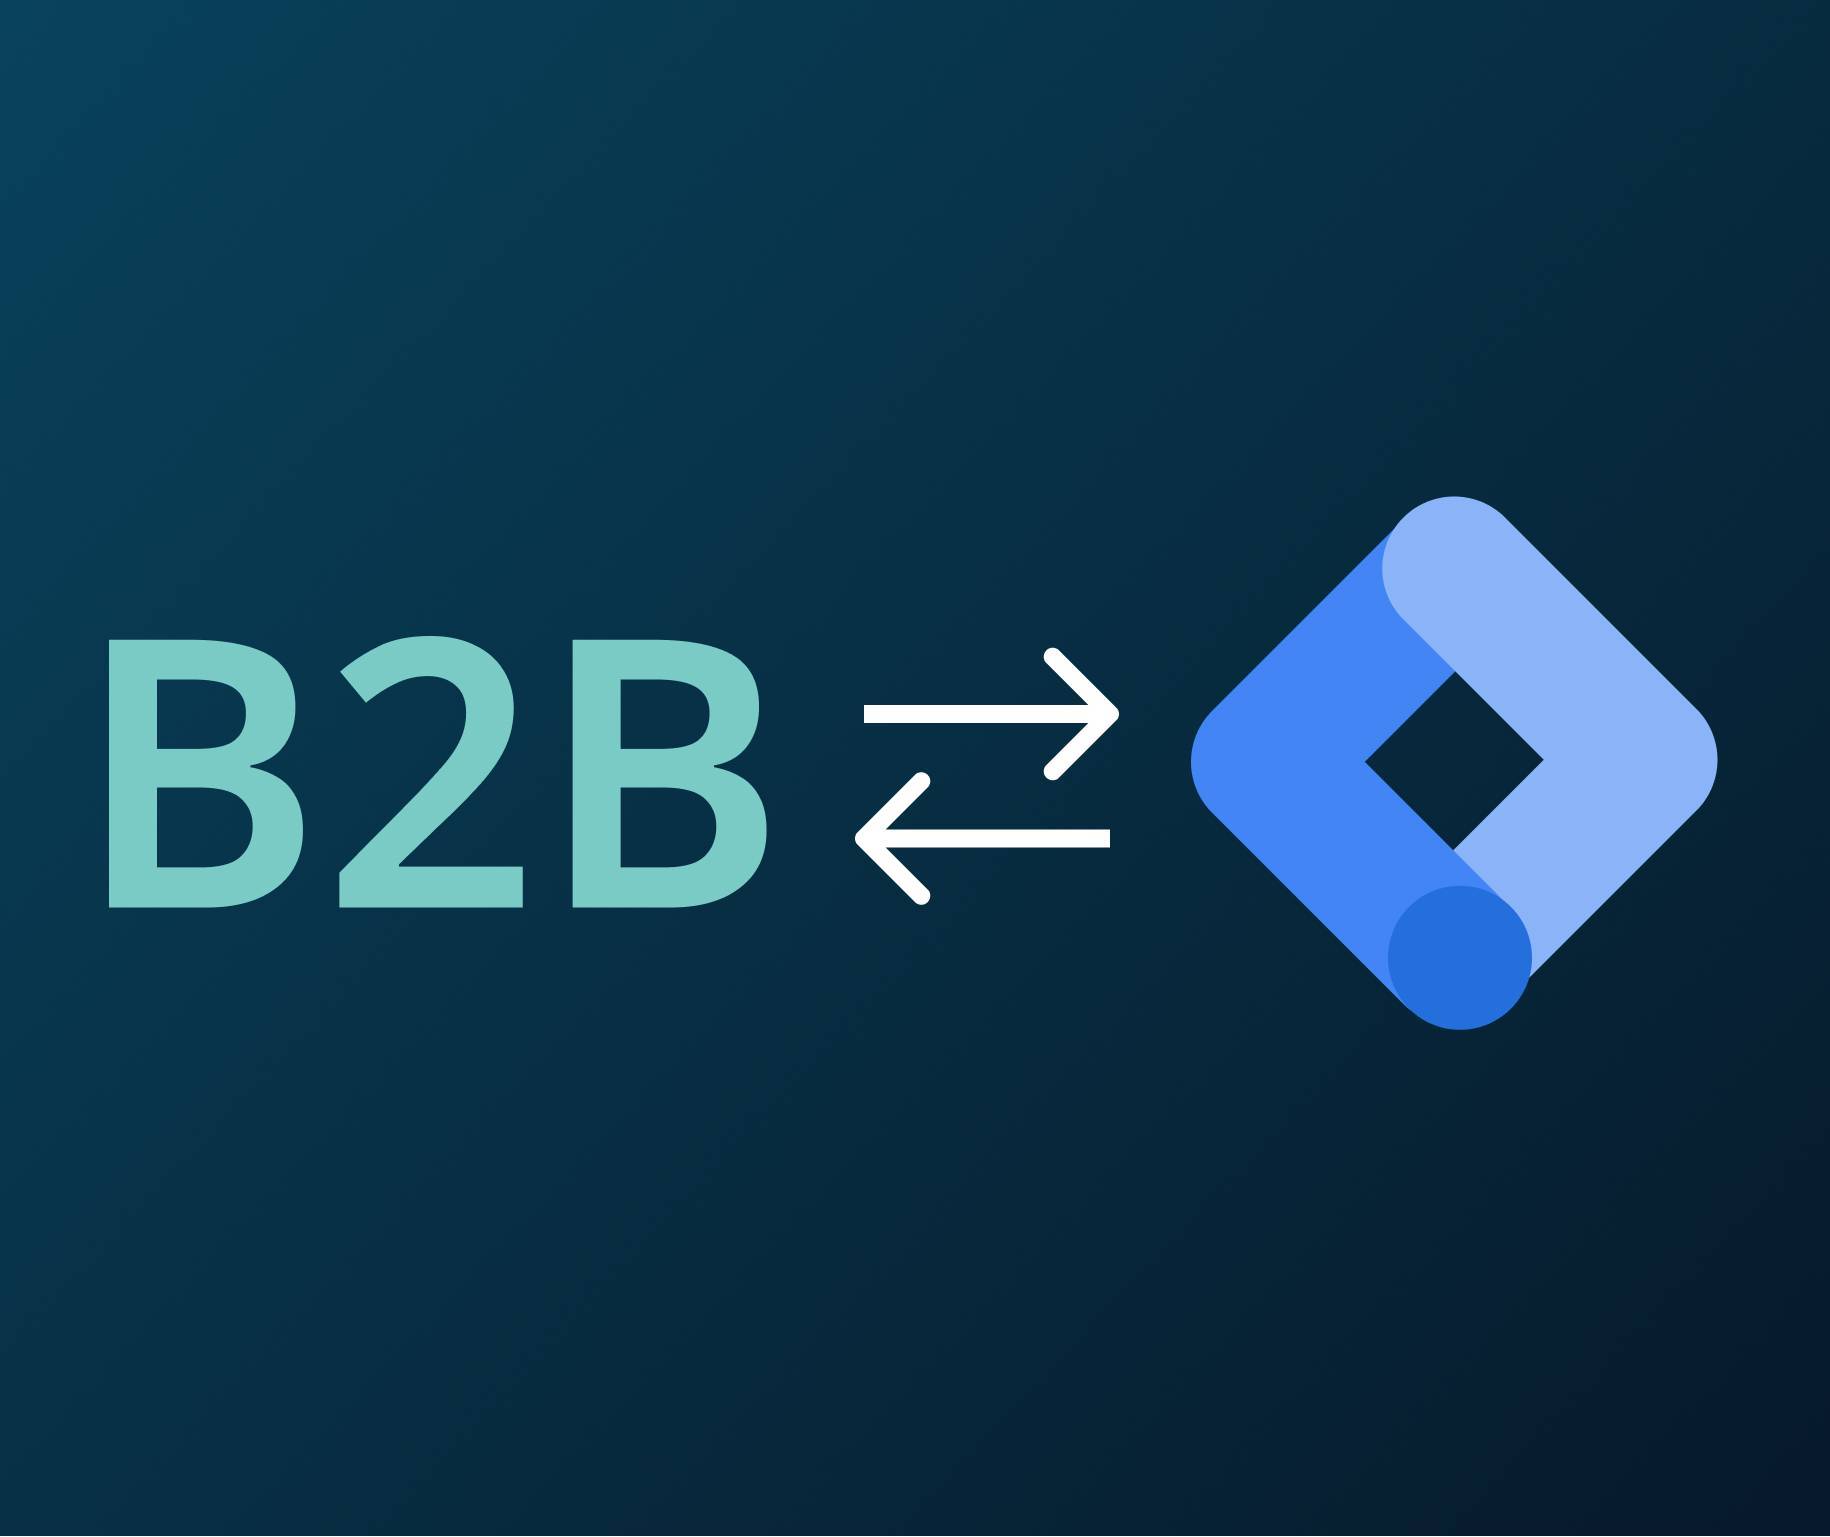 b2b and the google tag manager logo